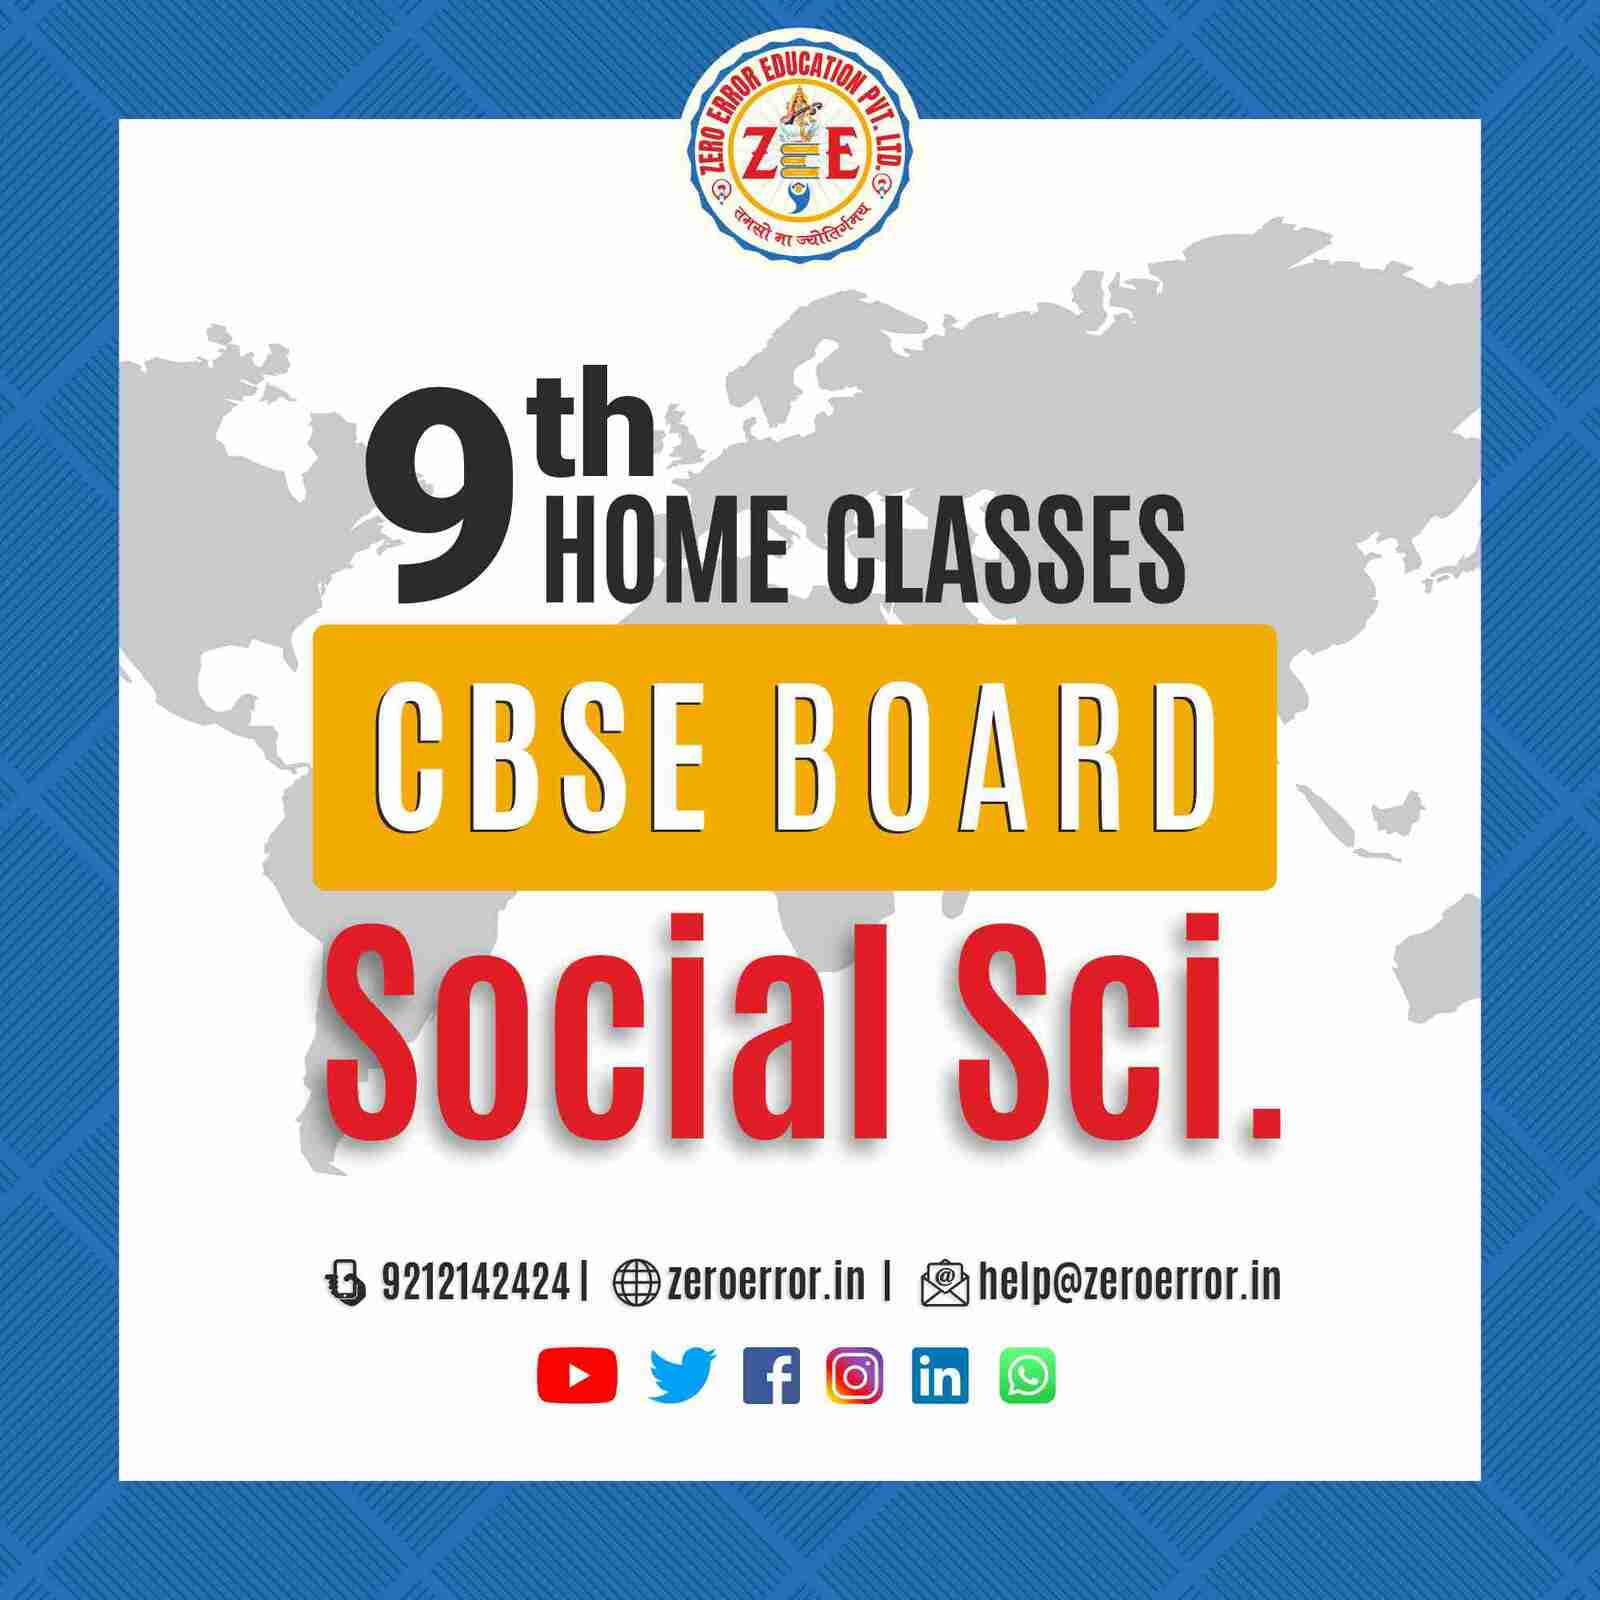 9th Grade CBSE Social Science Online Classes by Zero Error Education Prepare for your CBSE board exams with online and offline SST classes for 9th grade. Learn from experienced home tutors and get all the help you need to succeed. Enroll today at Zero Error Education. [https://zeroerror.in/] Call 9212142424 for more information.